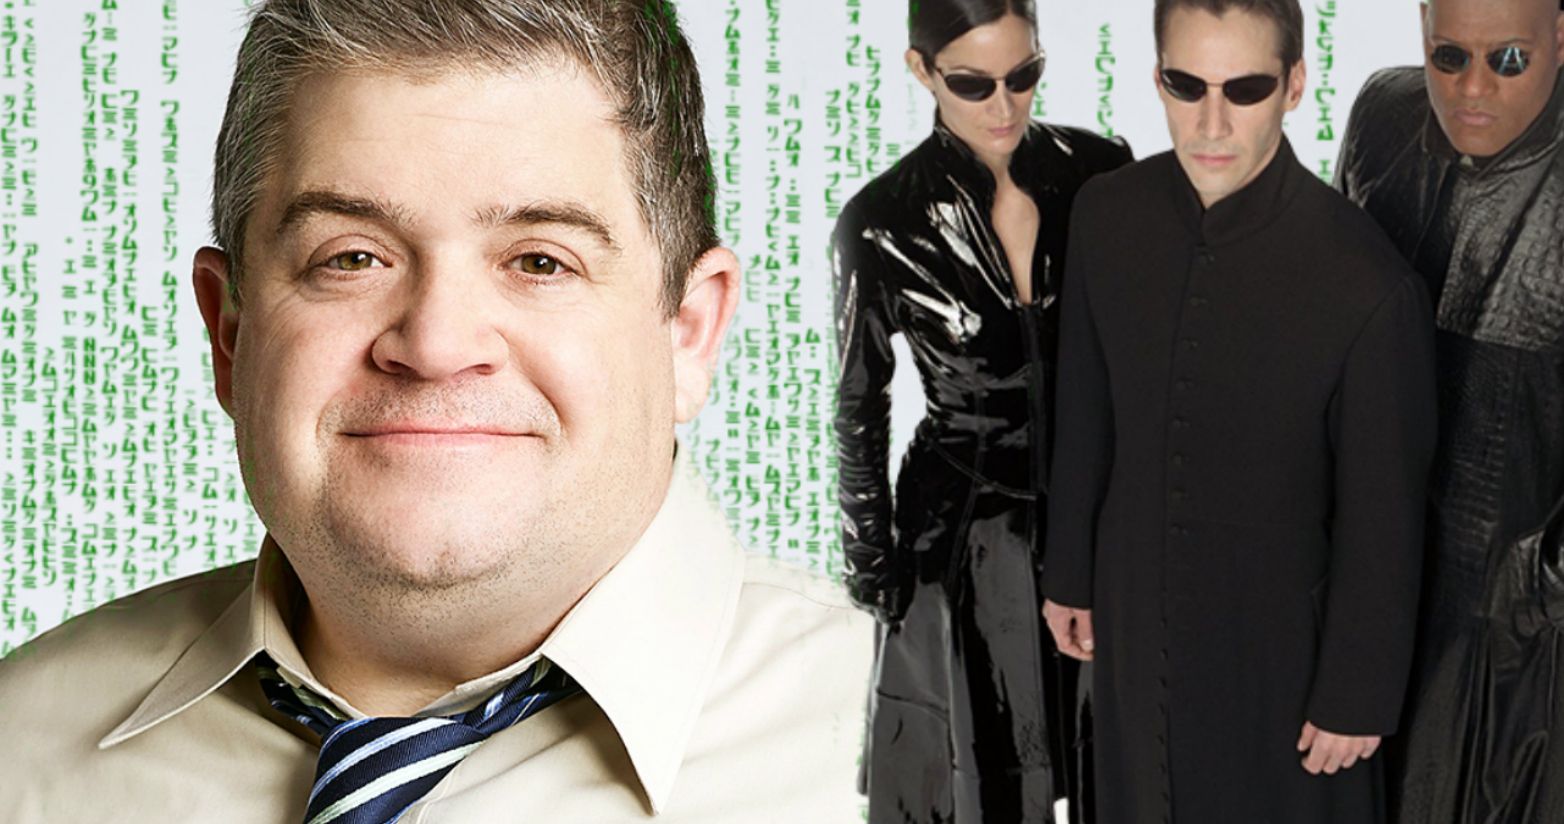 Patton Oswalt Goes on an Epic Matrix Rant, Argues That Neo Isn't the True Hero